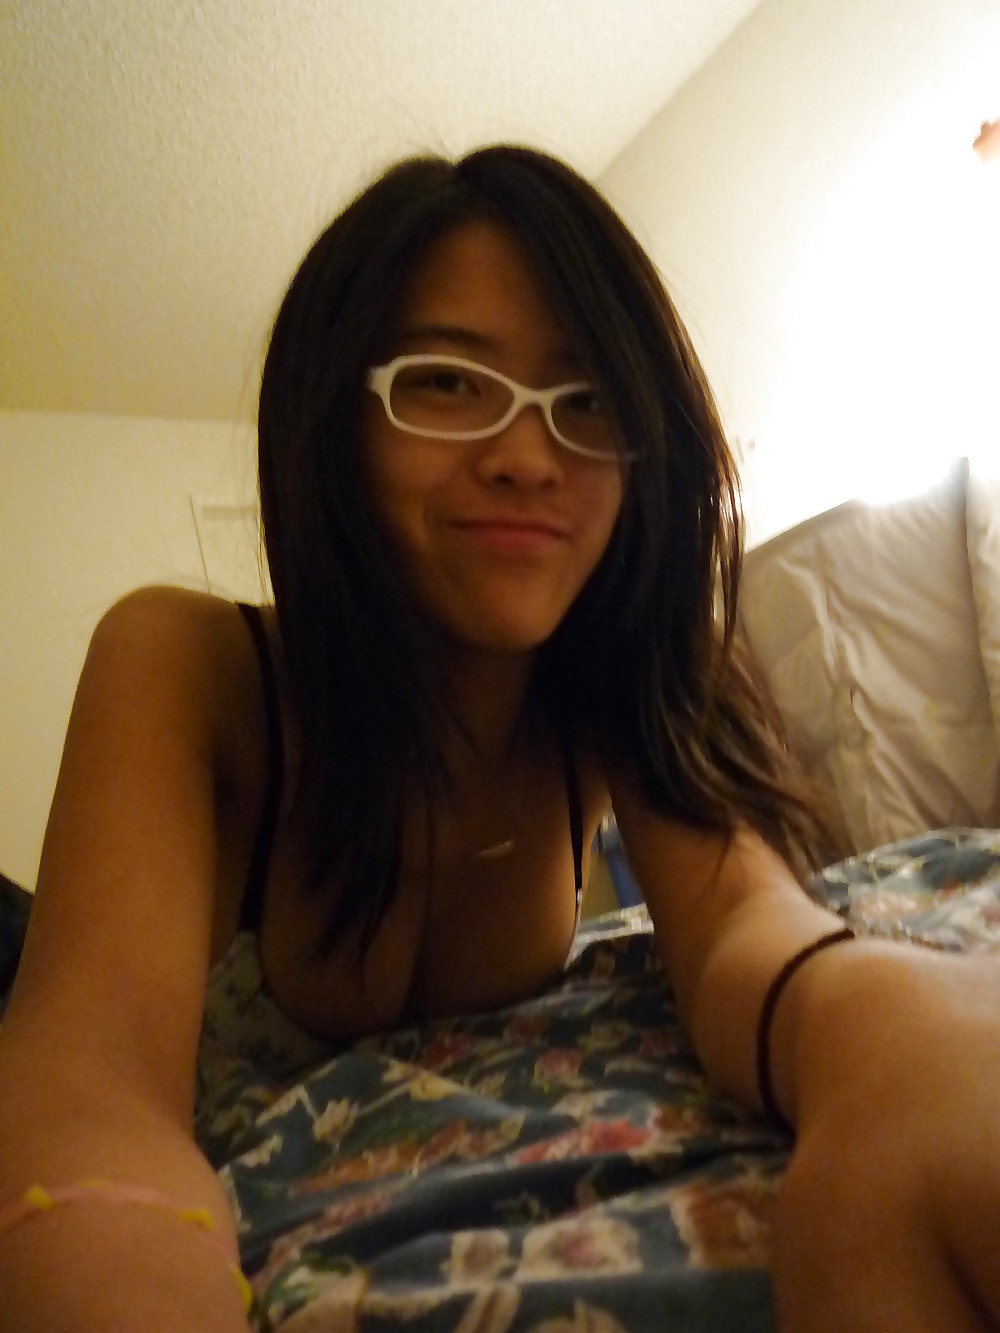 Nude asian girl with glasses sexy porn pictures